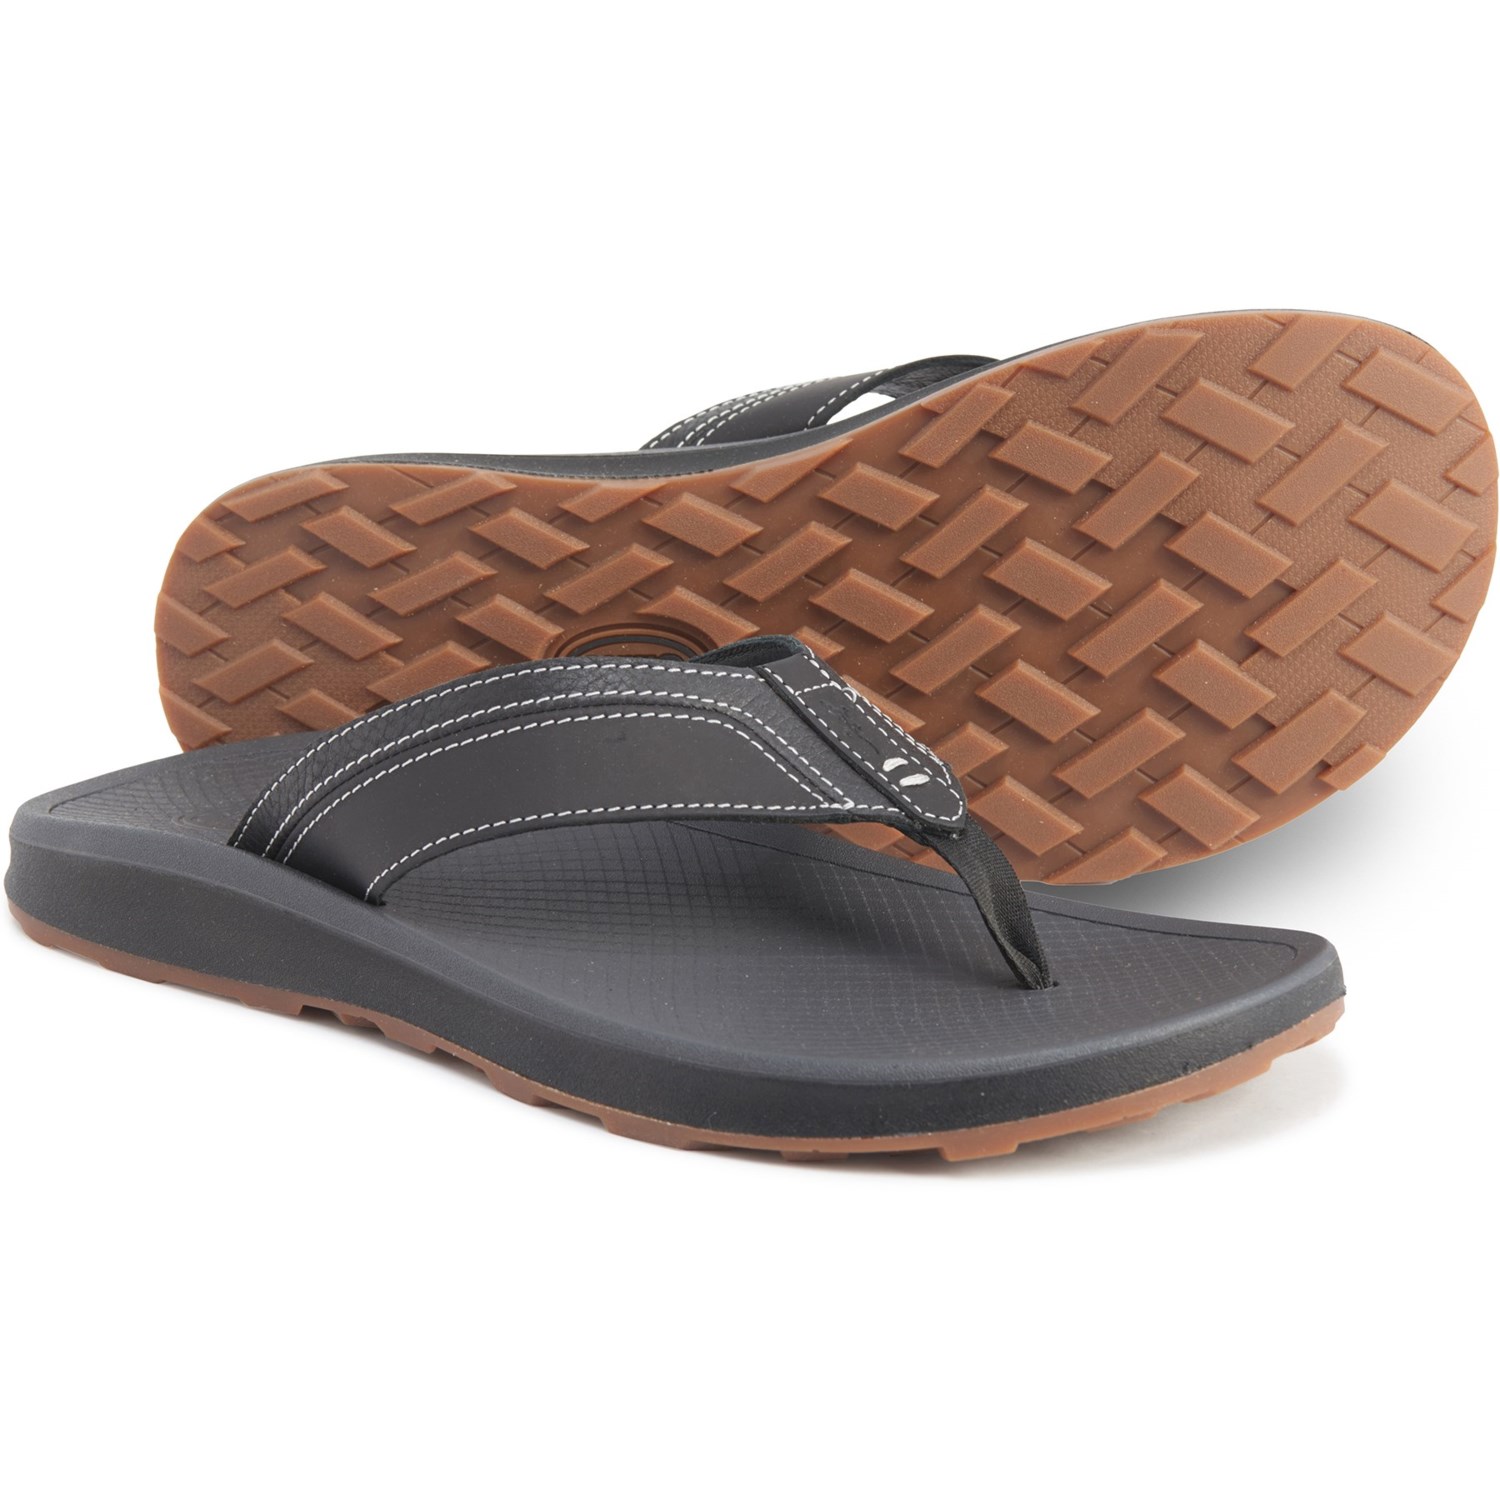 chaco sandals sold near me